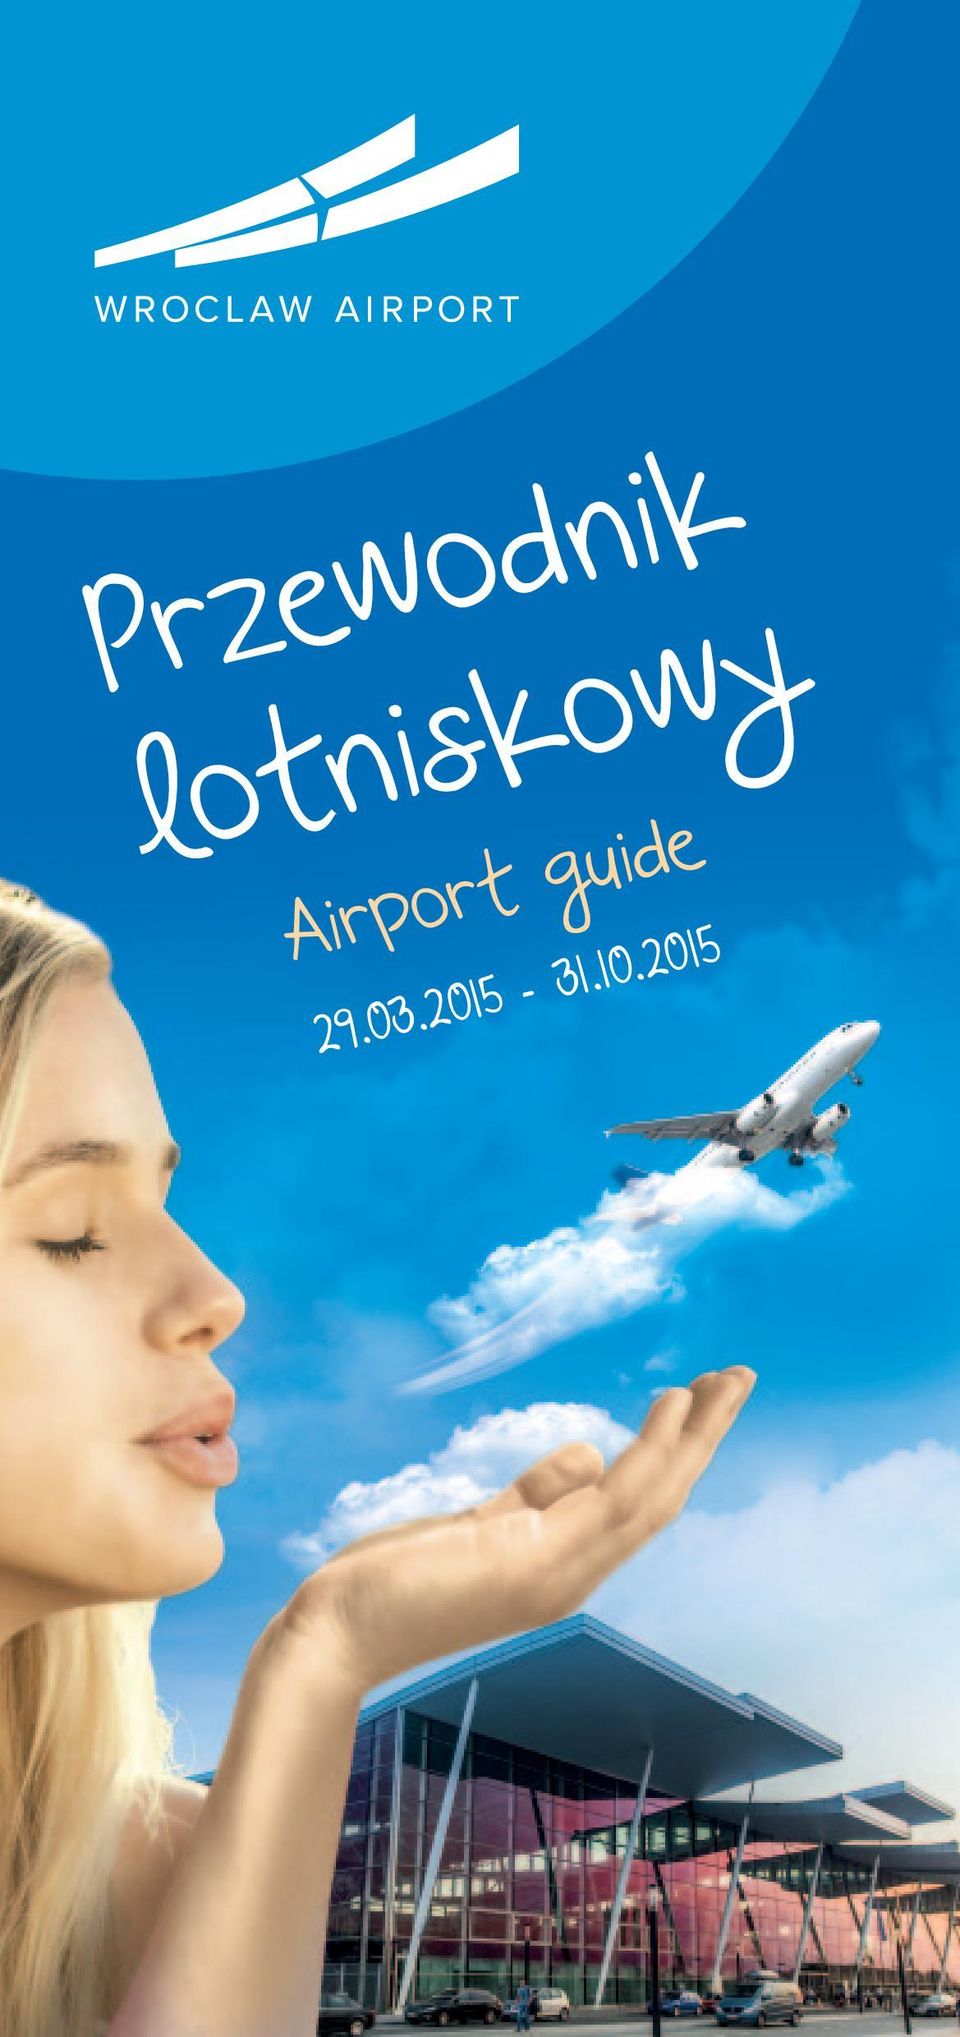 Airport guide